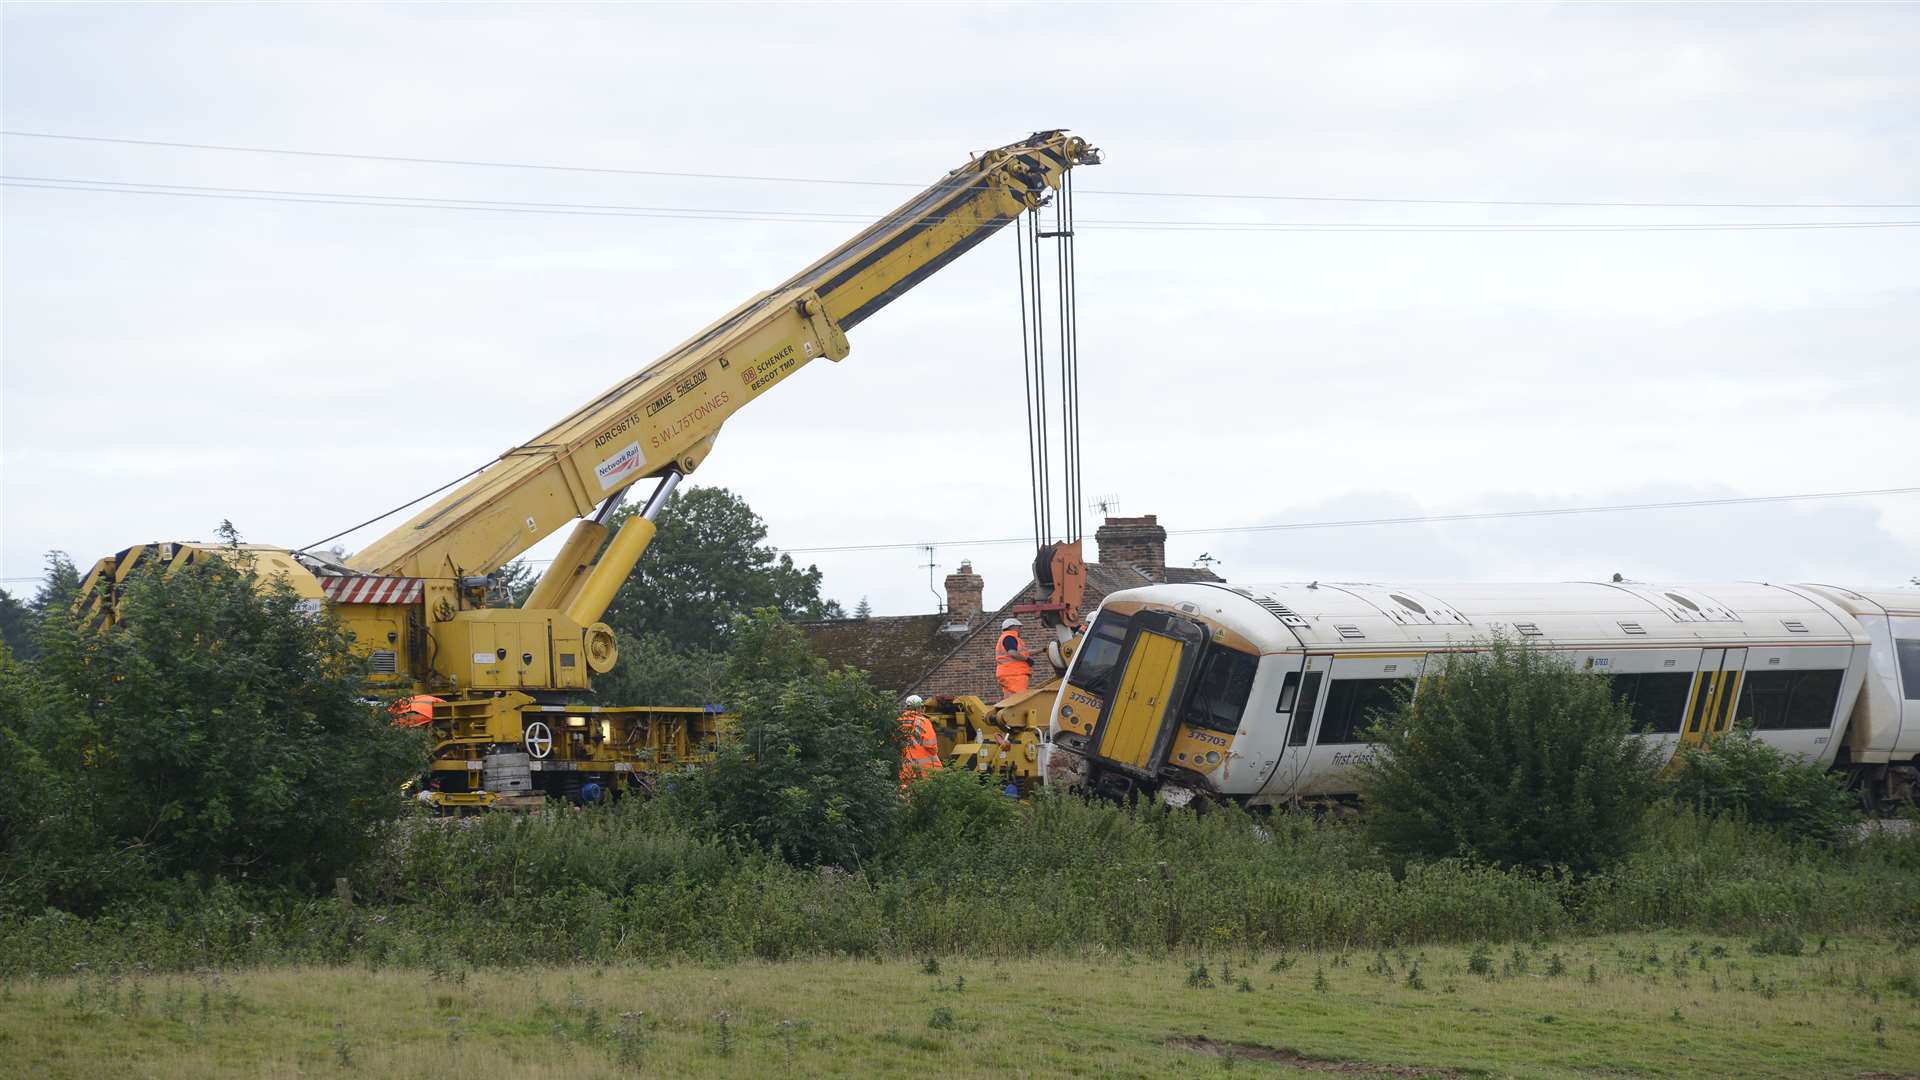 The crane was drafted in after the derailment